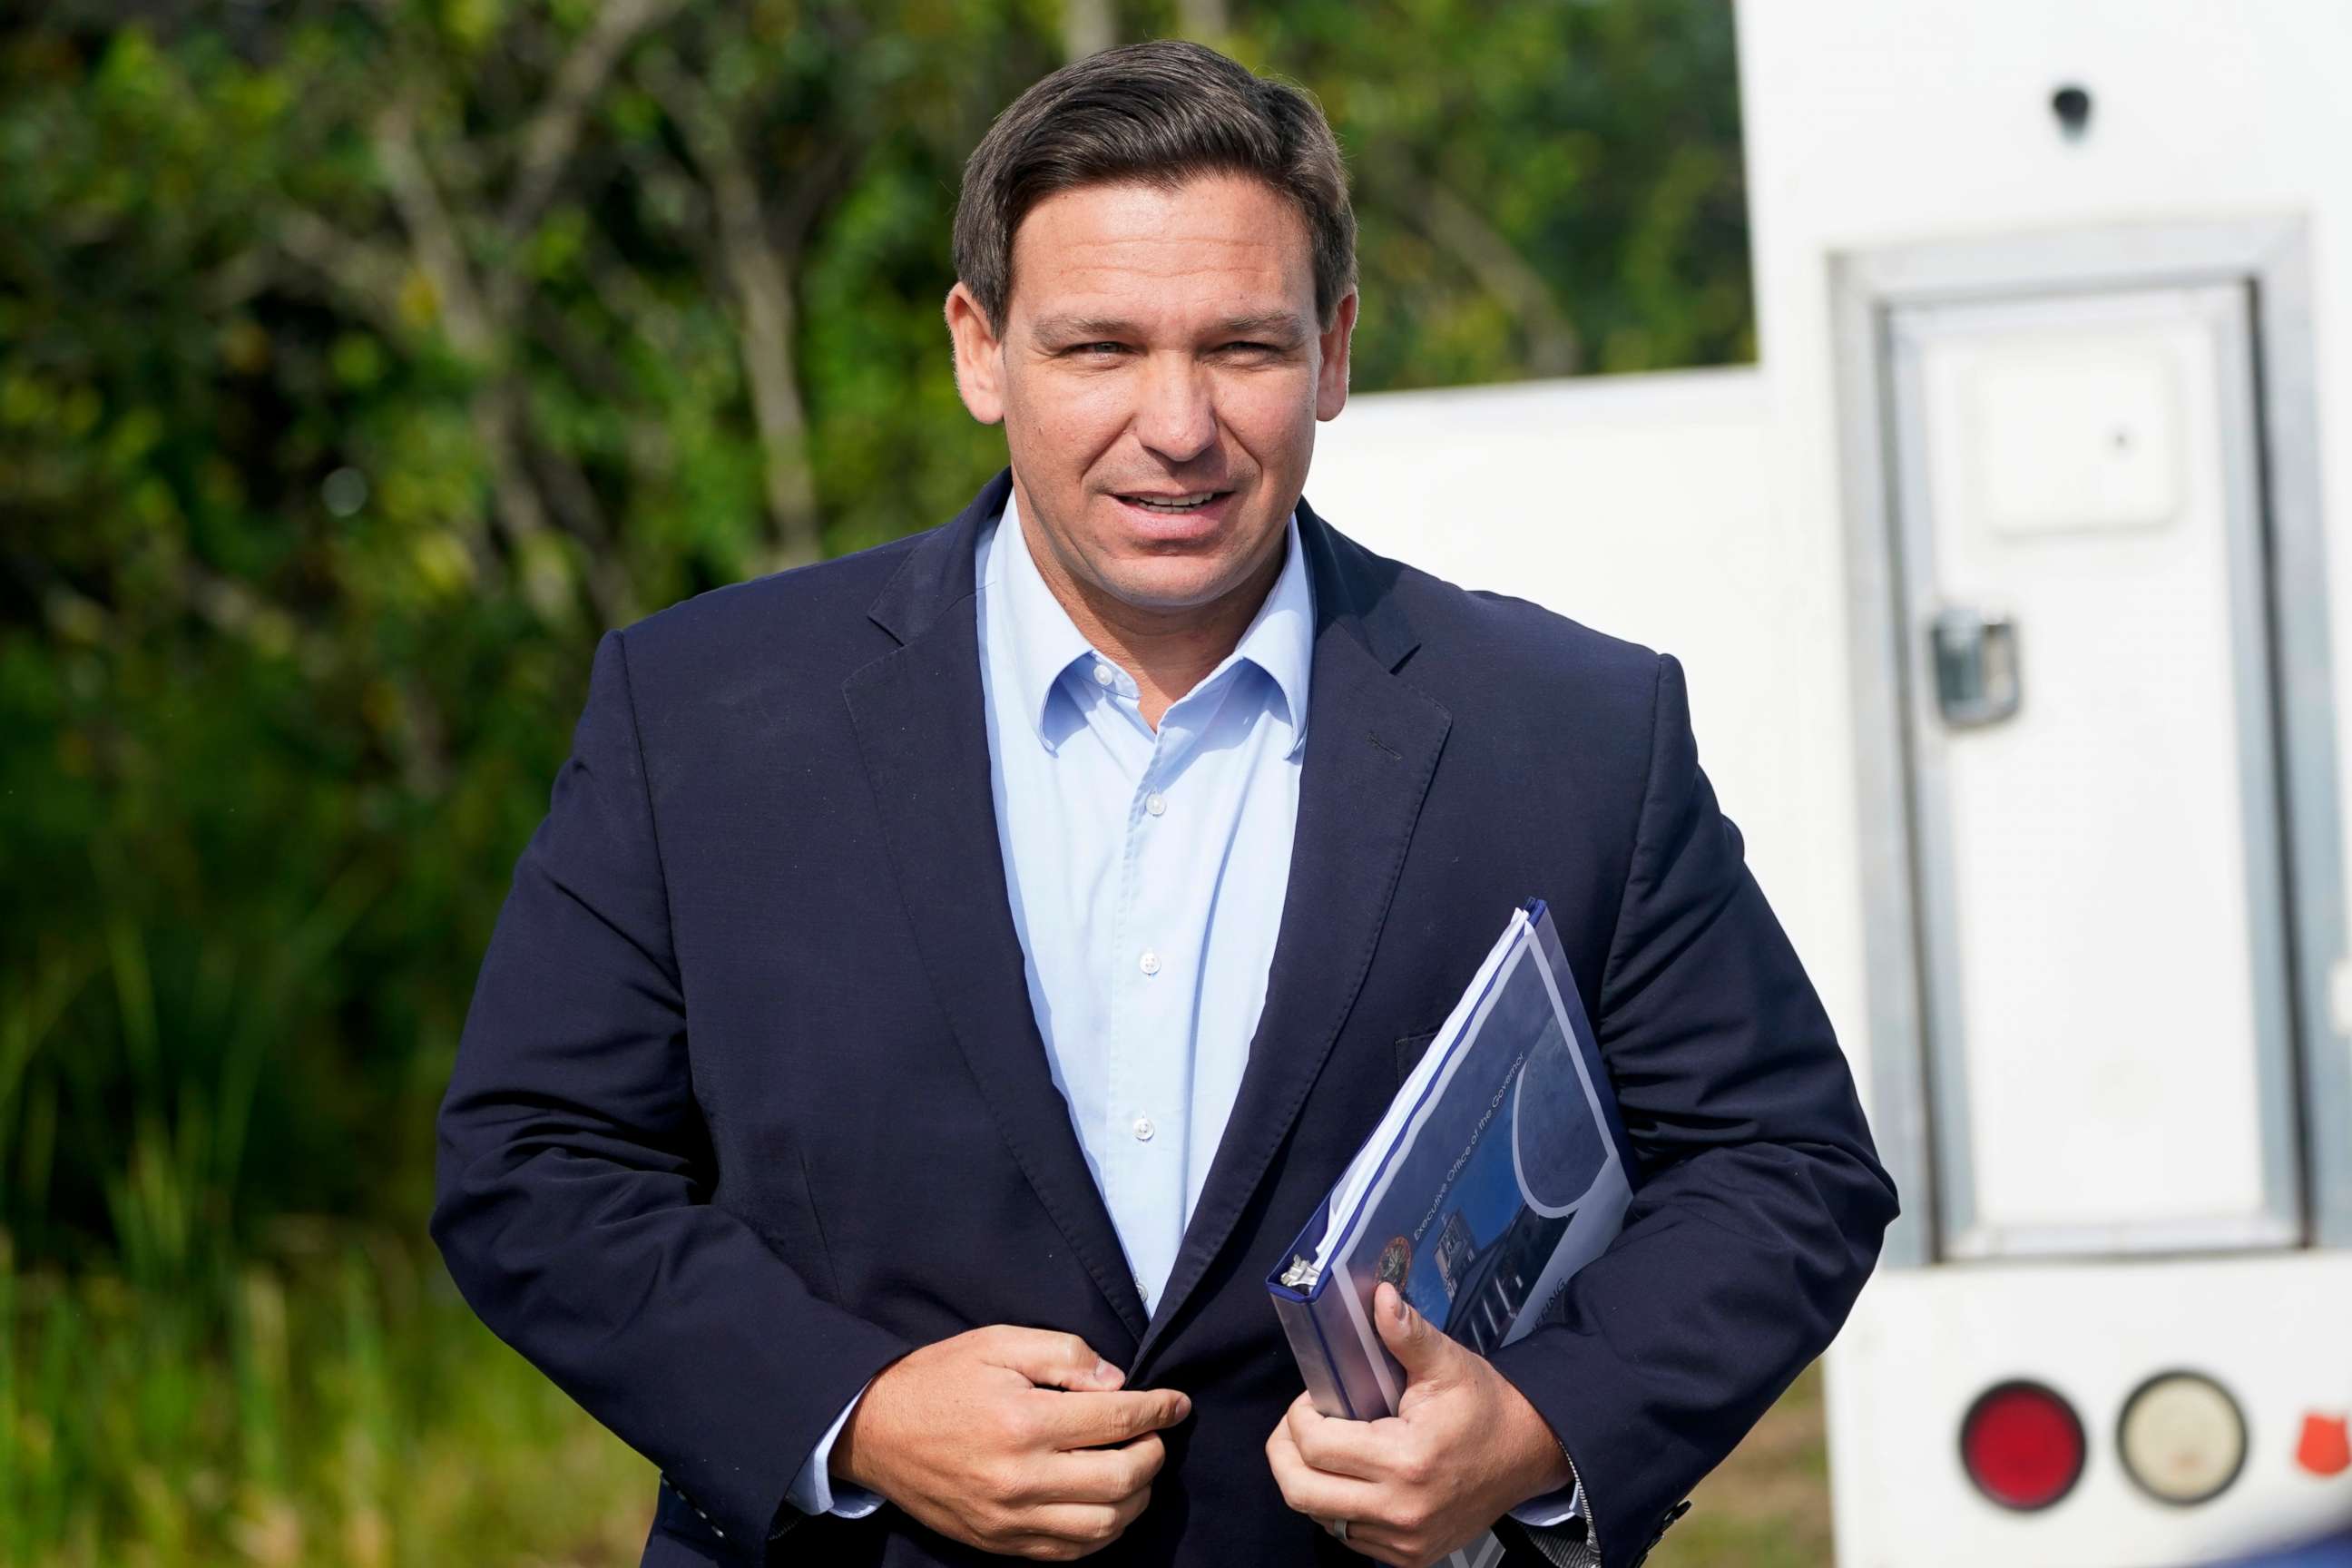 PHOTO: Florida Gov. Ron DeSantis arrives at a news conference, Aug. 3, 2021, near the Shark Valley Visitor Center in Miami.